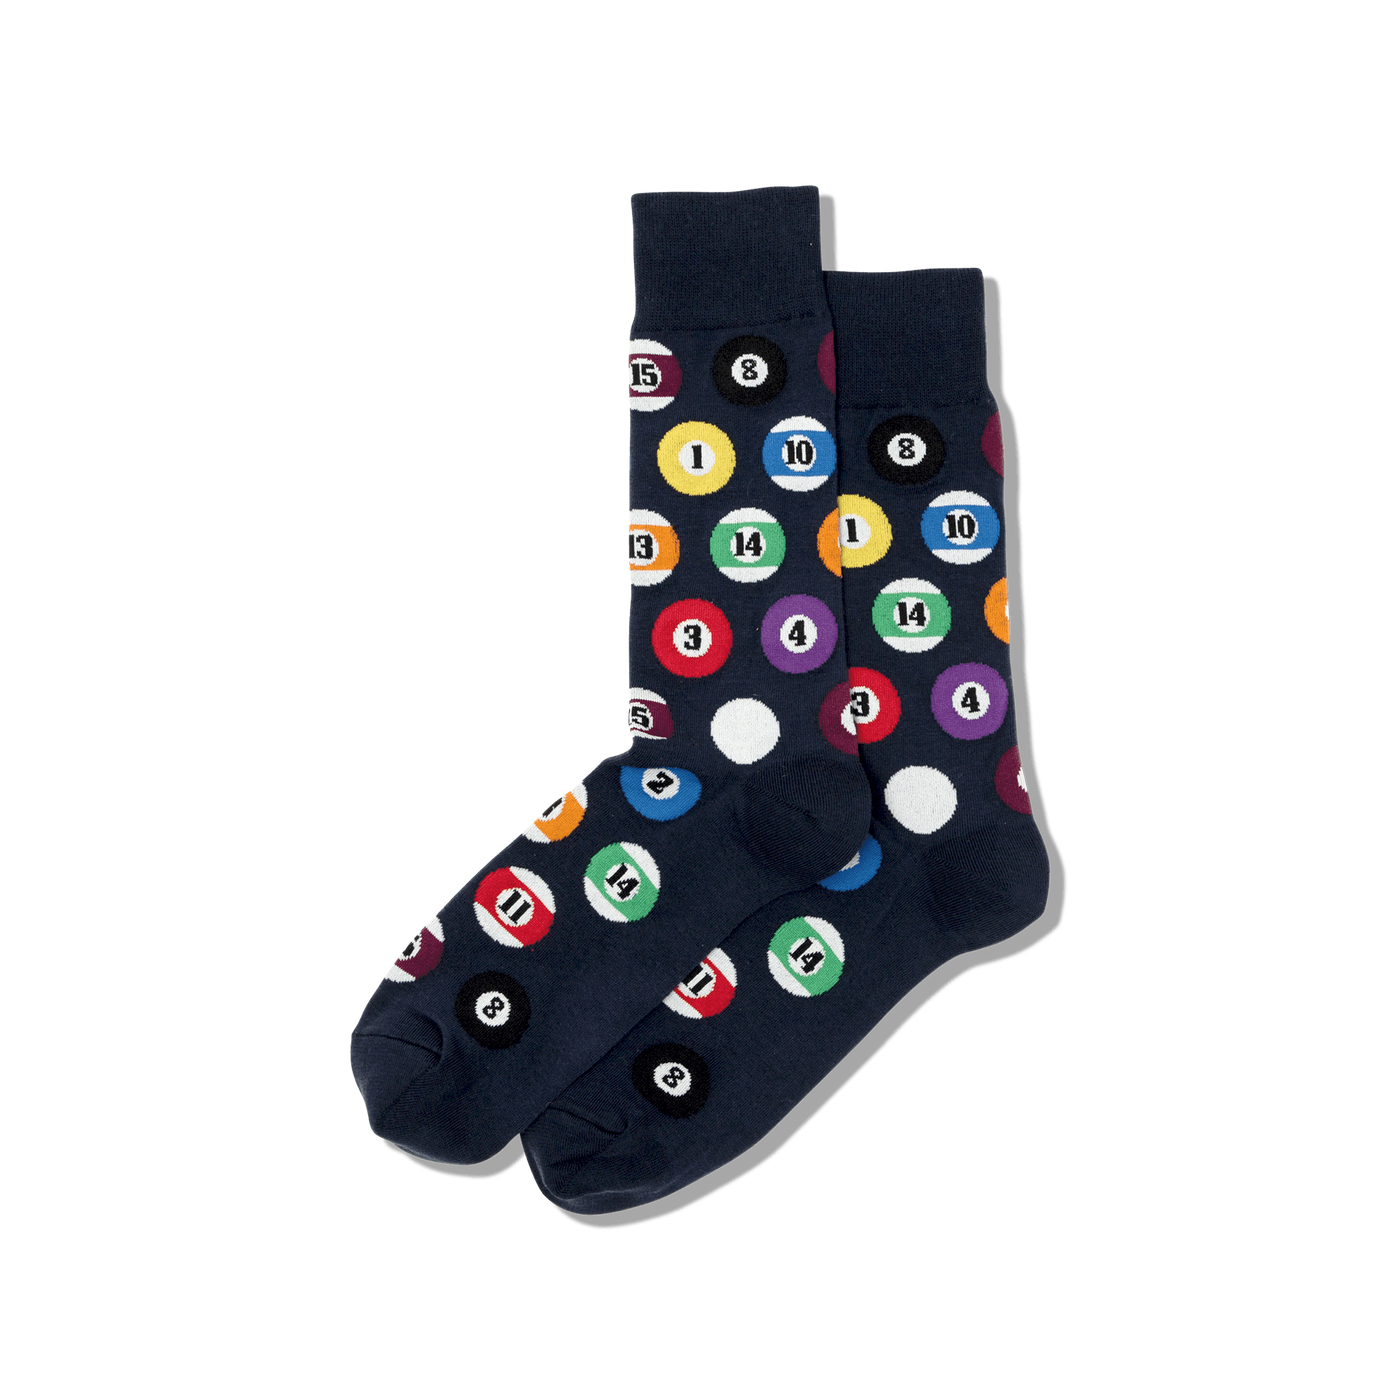 "Billiards" Cotton Crew  Socks by Hot Sox - Large